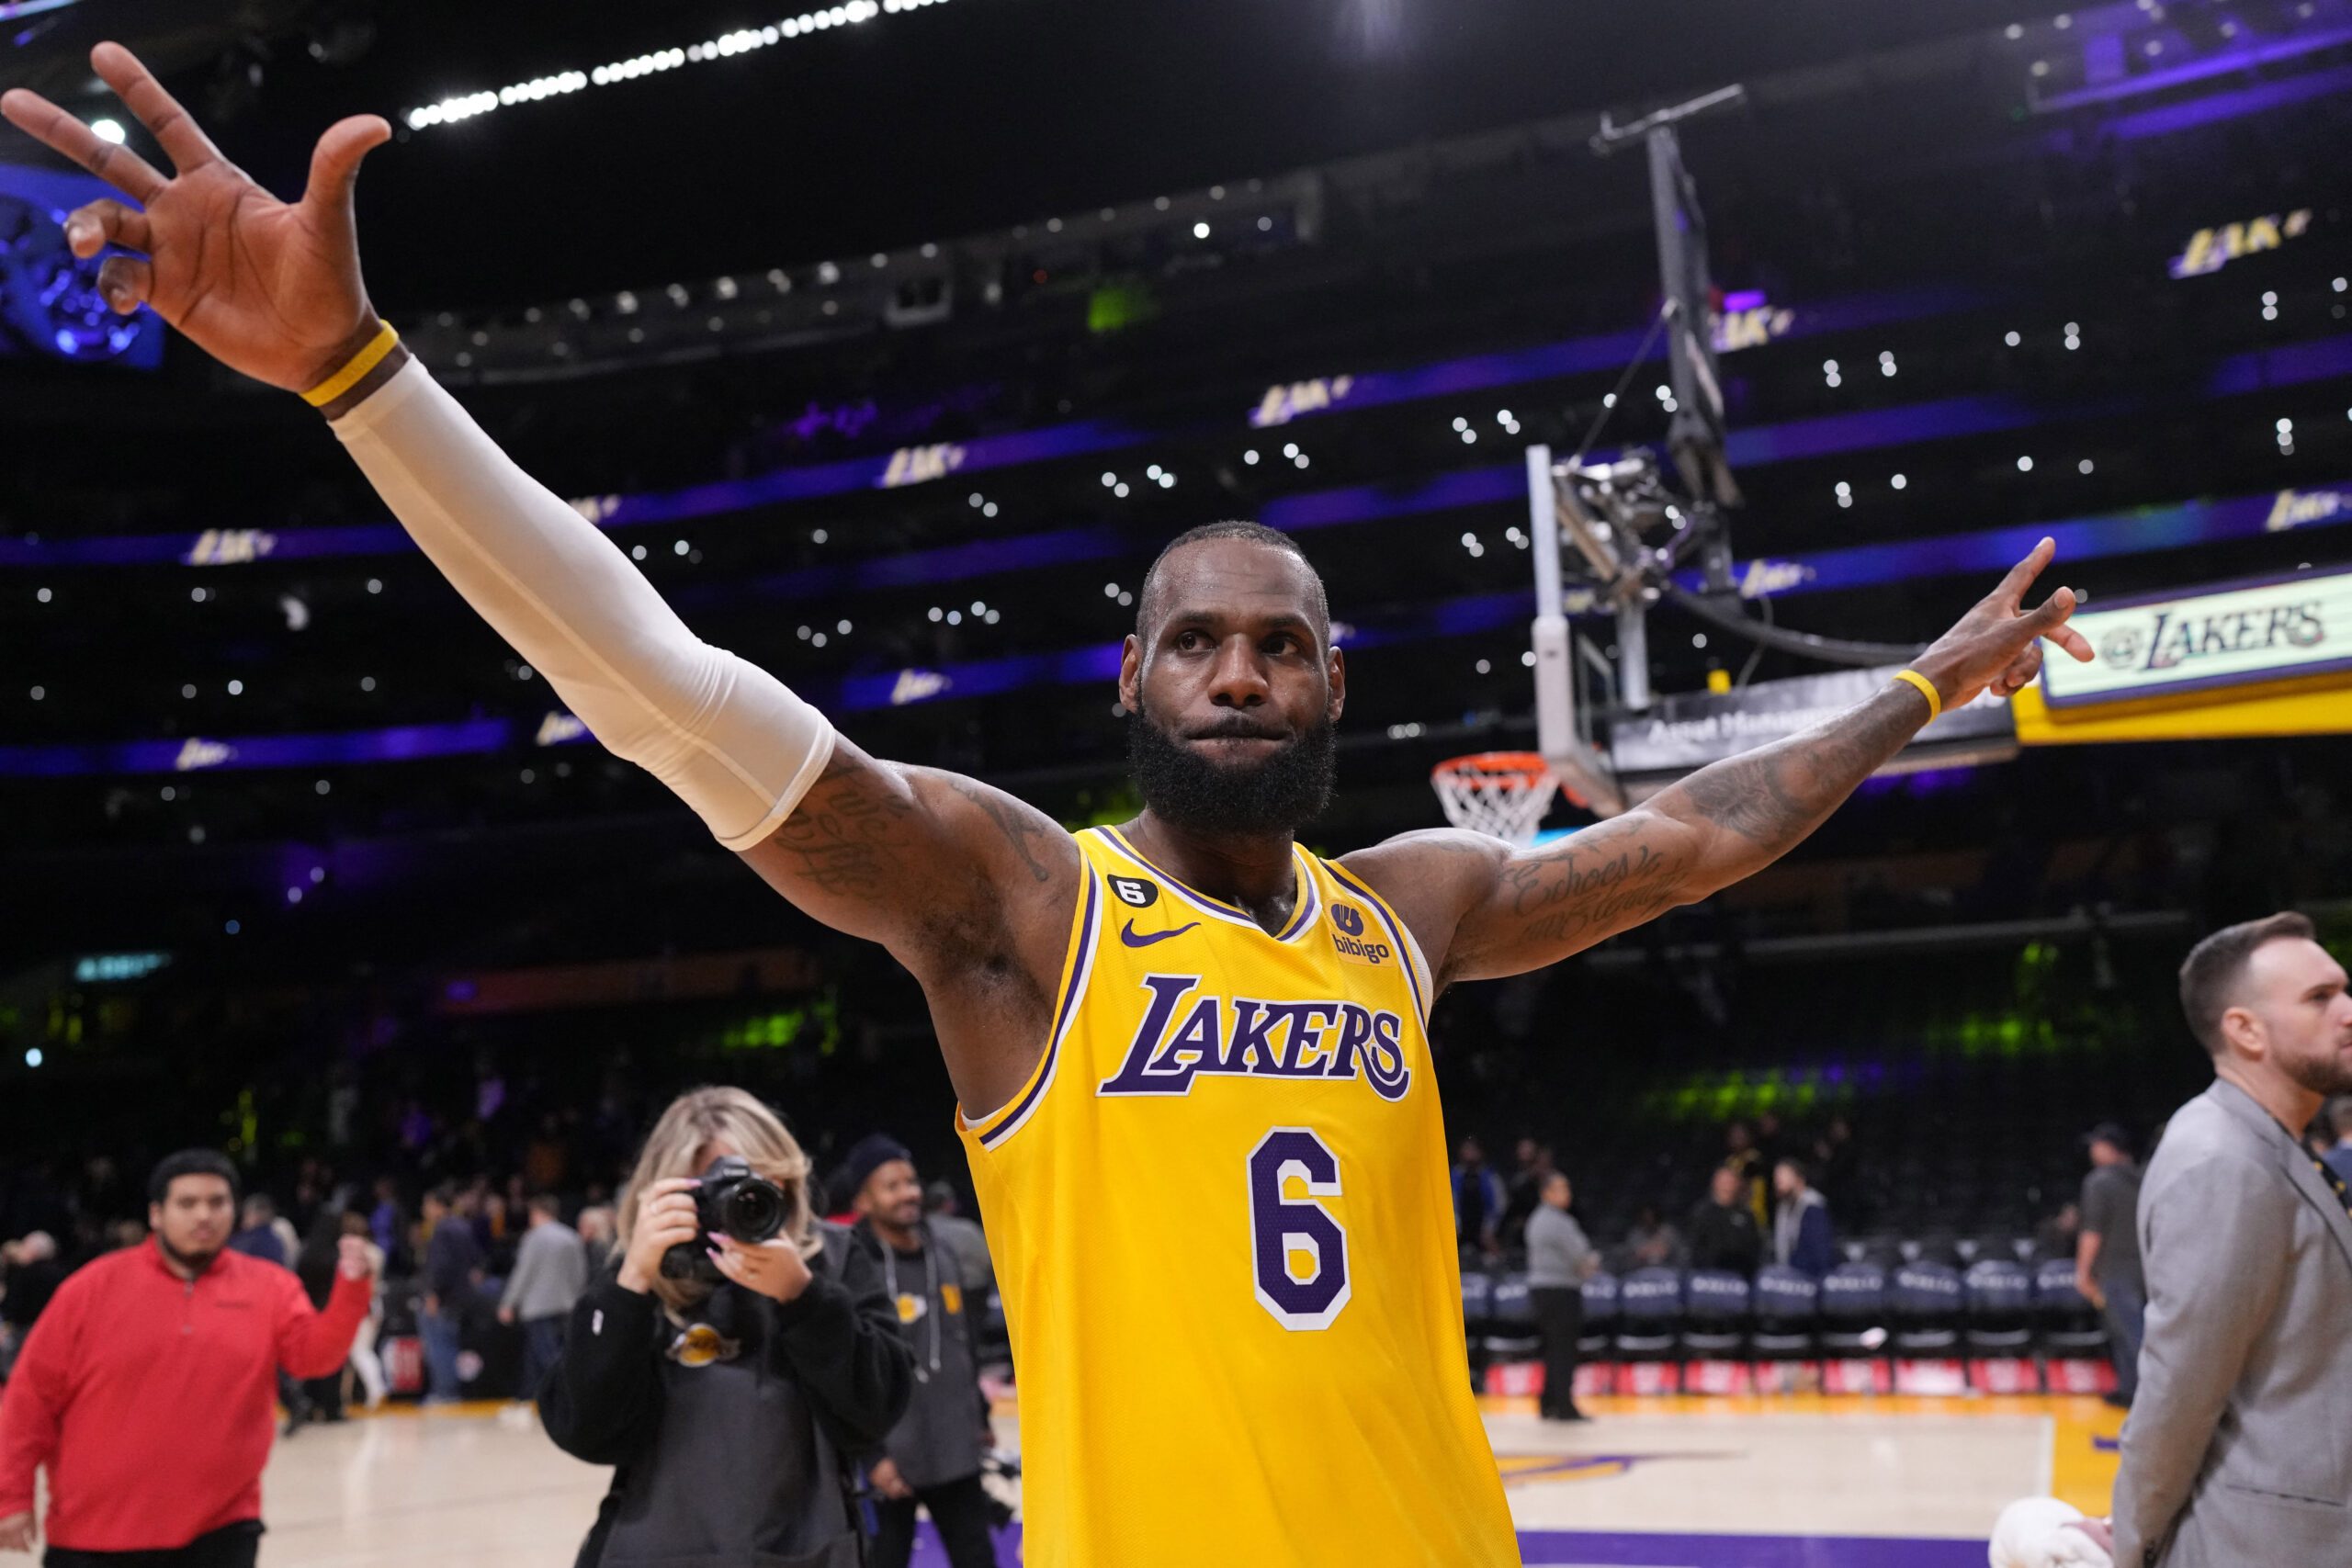 Inside the numbers: LeBron James is now the NBA's oldest player